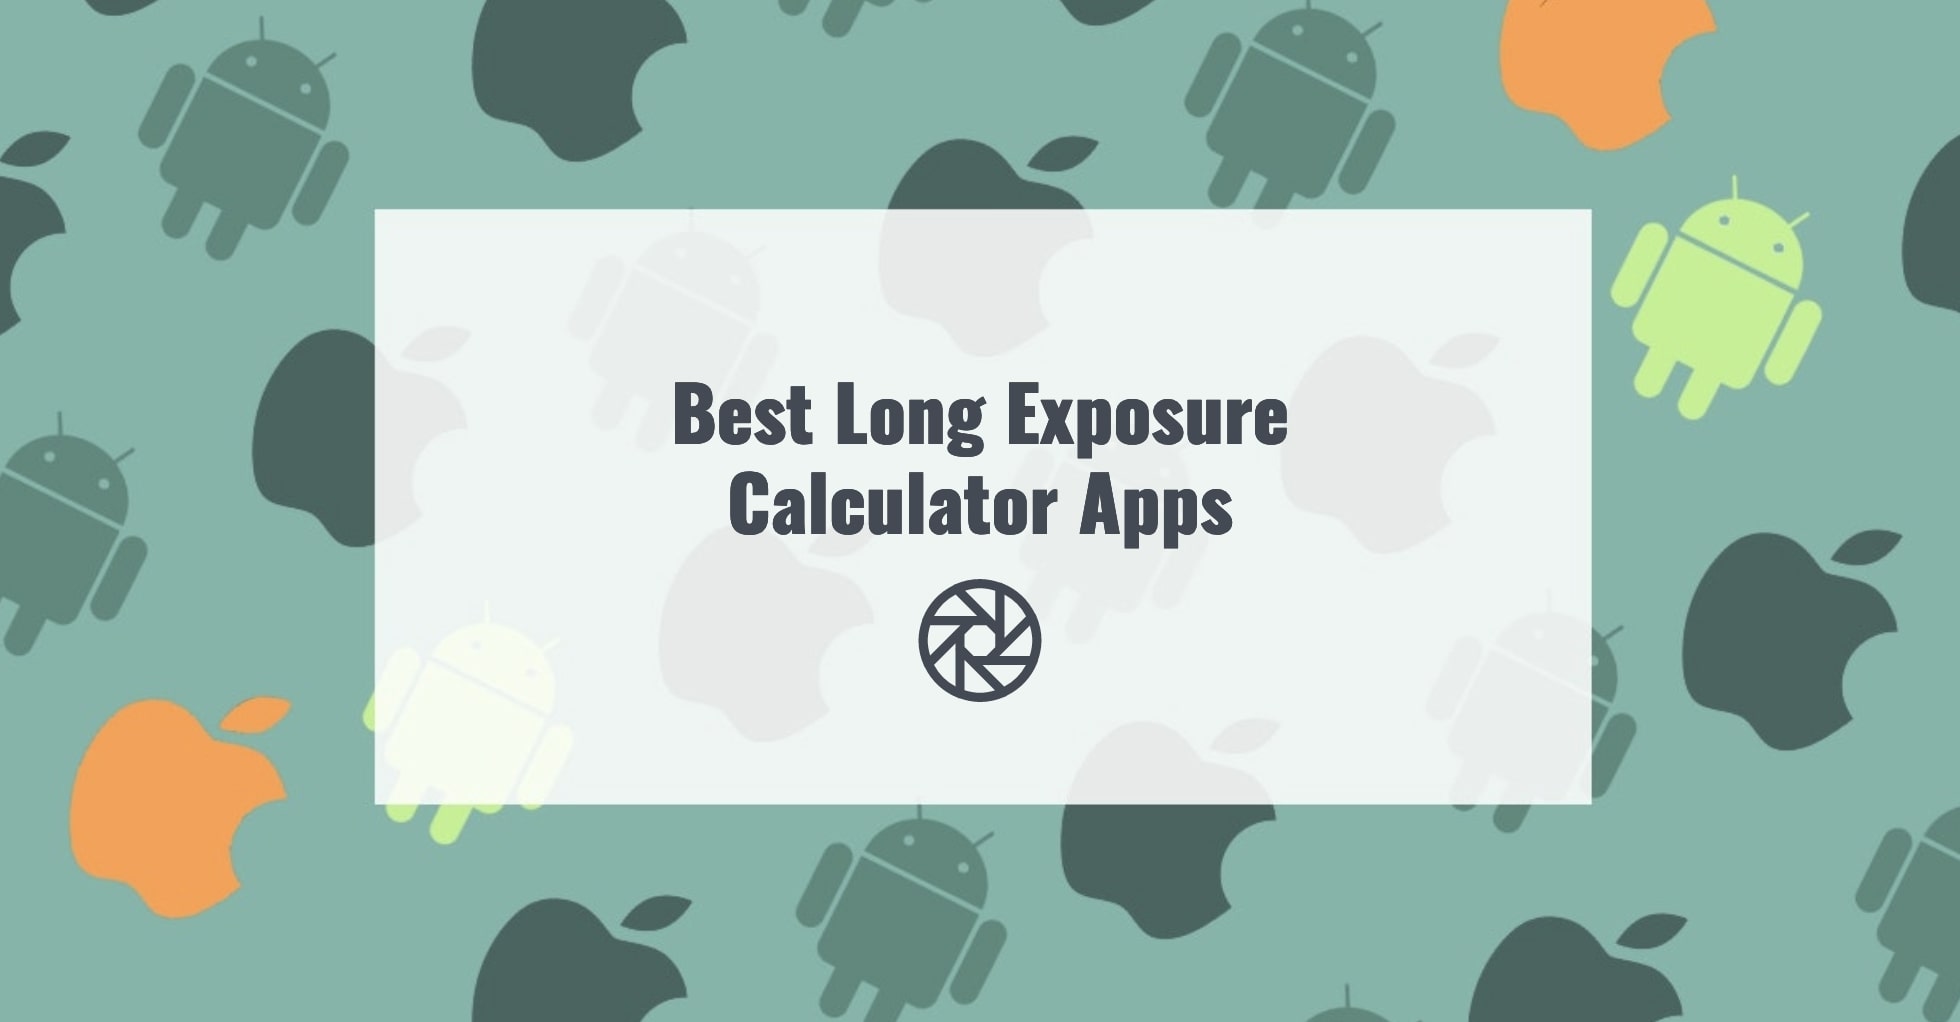 5 Best Long Exposure Calculator Apps for Android & iOS